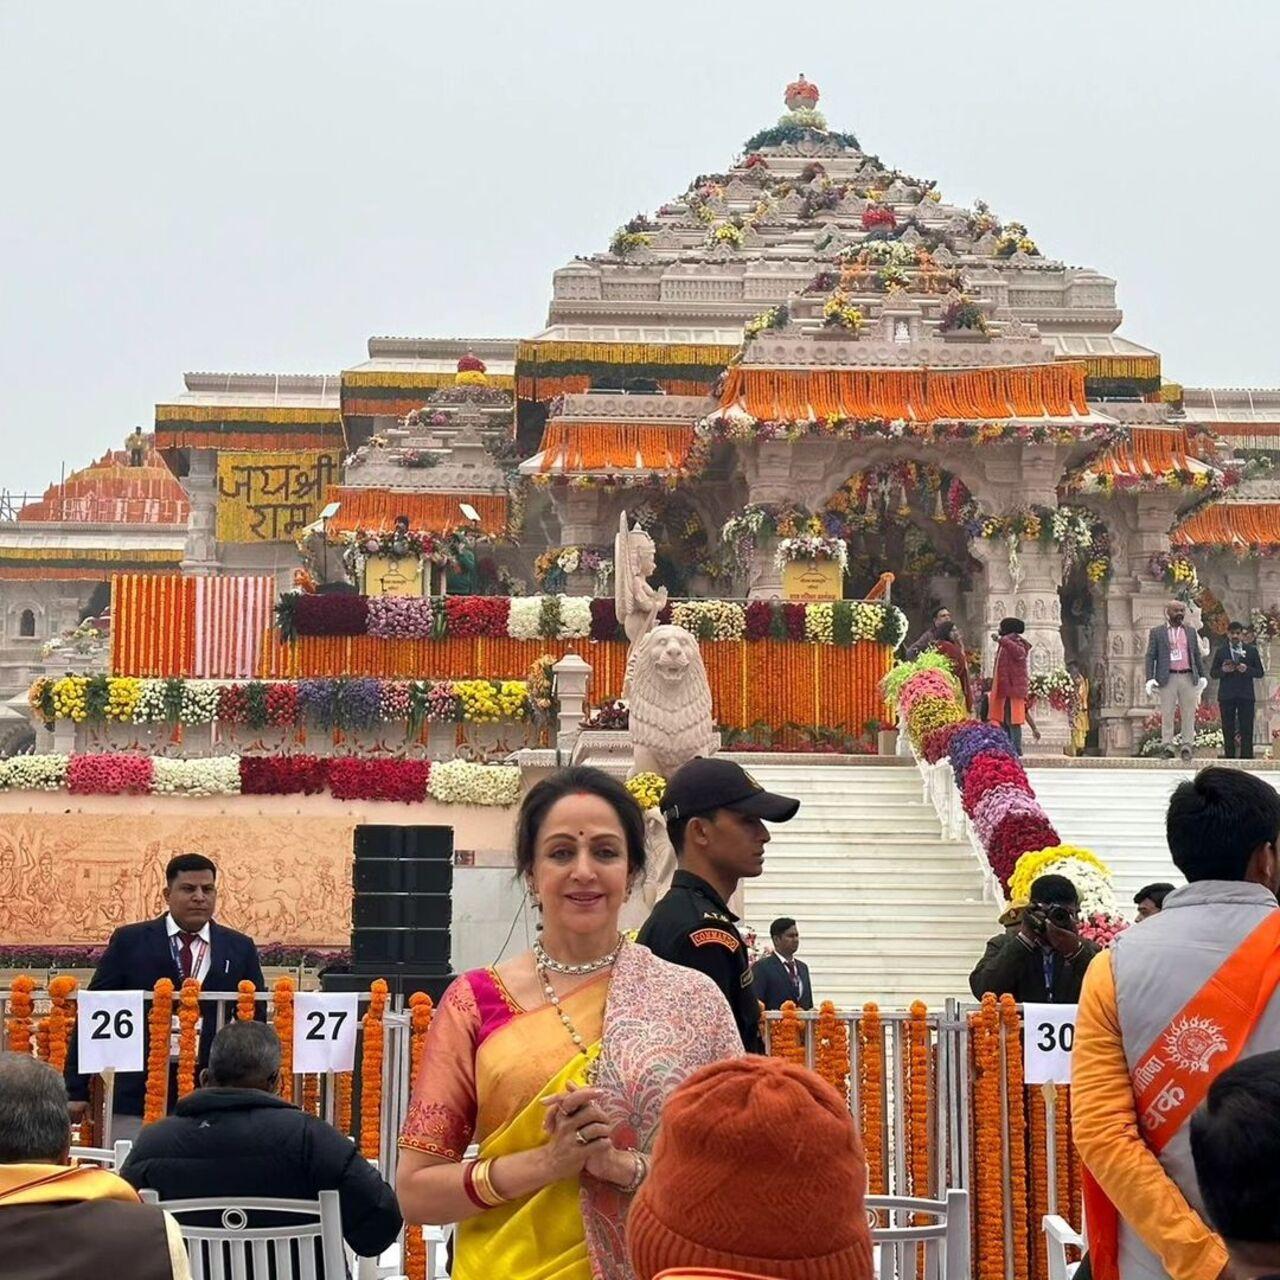 Hema Malini, who has attended the Ram Mandir Pran-Pratishtha ceremony, has dropped first pictures from her visit